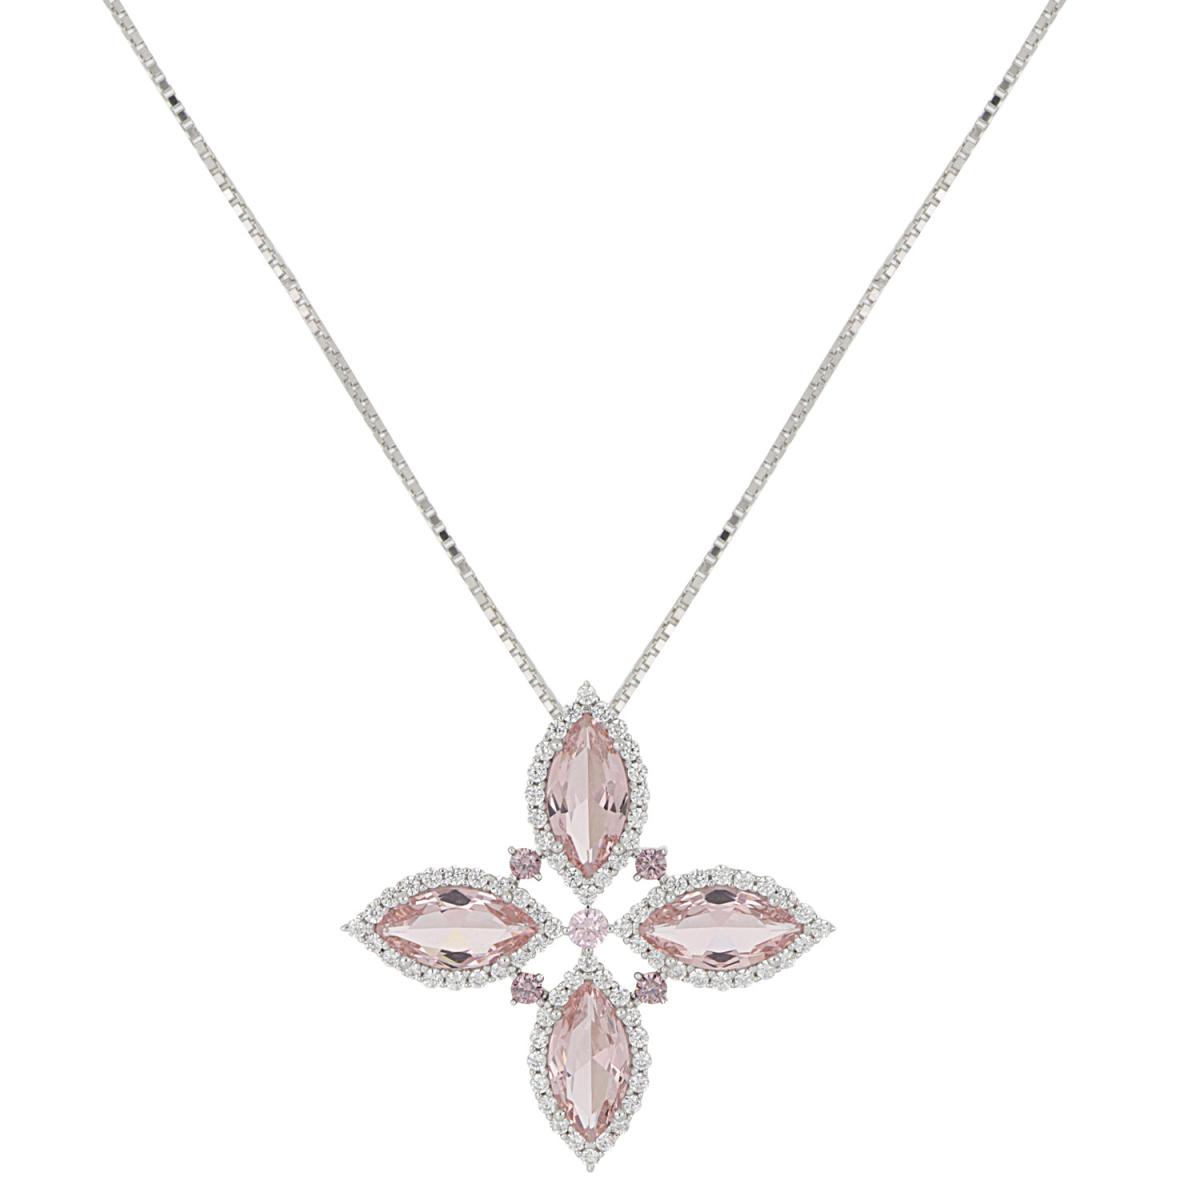 Cross necklace in 925 rhodium silver with zircons and siamites available in various colors - ZCL1407